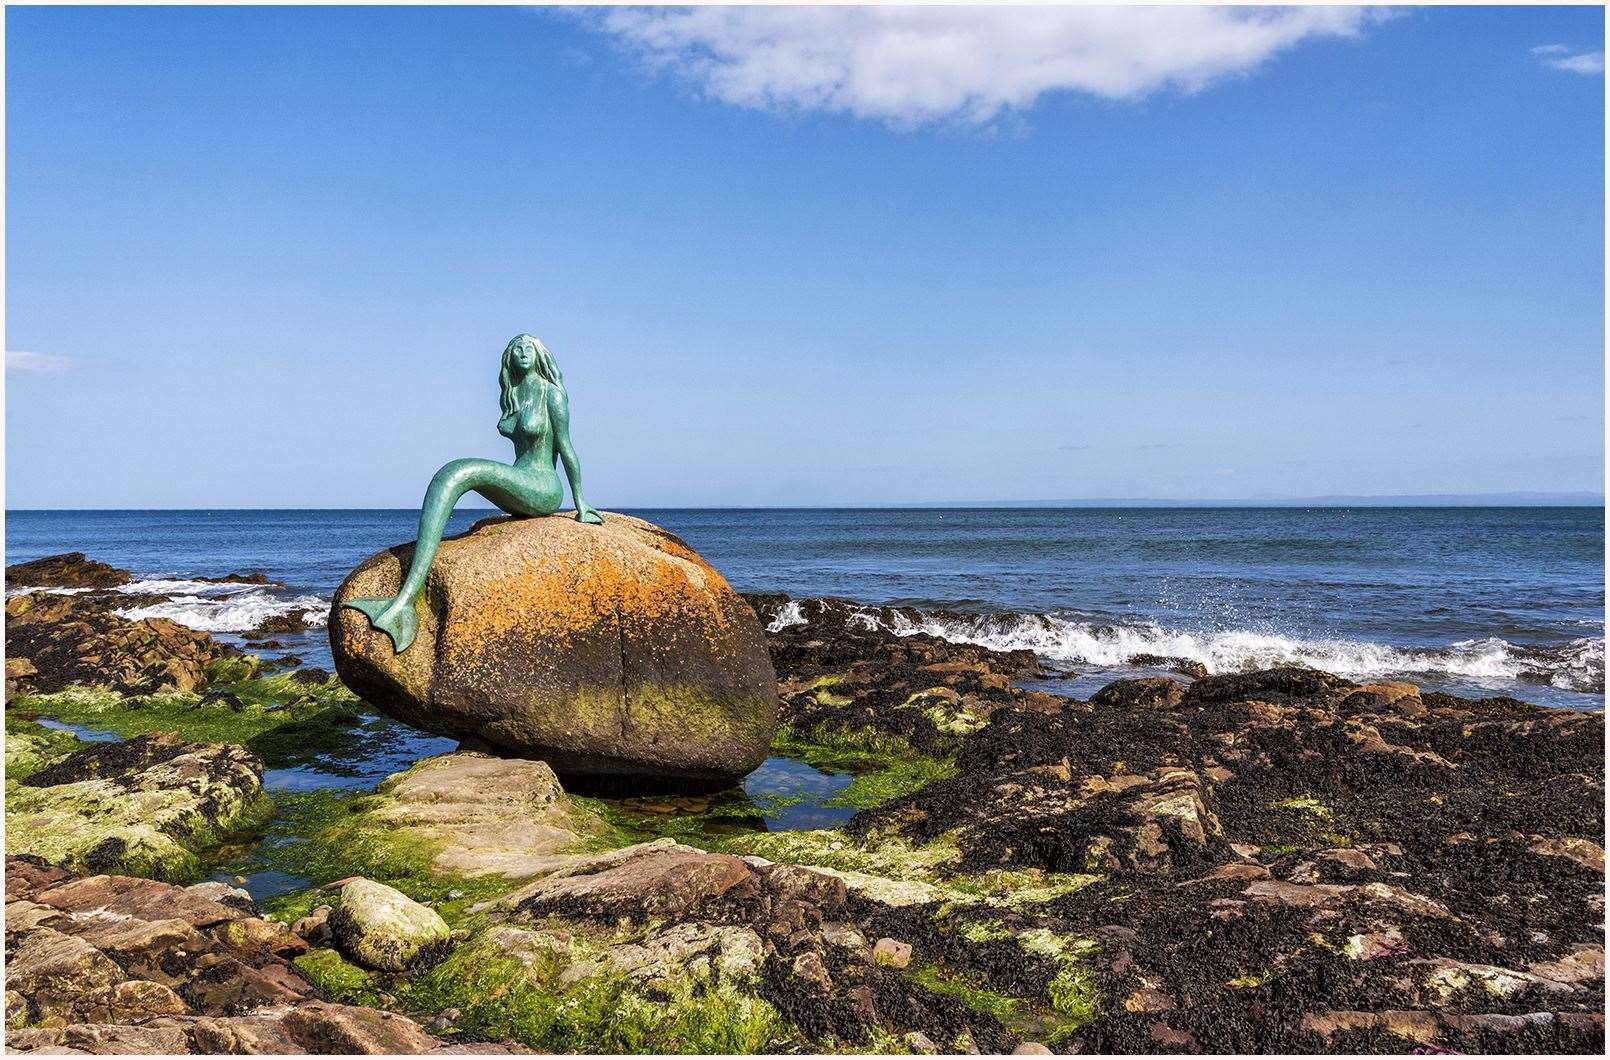 Linda Ross encountered Balintore's Mermaid of the North on a beautiful day. The sculpture is a major local visitor attraction.